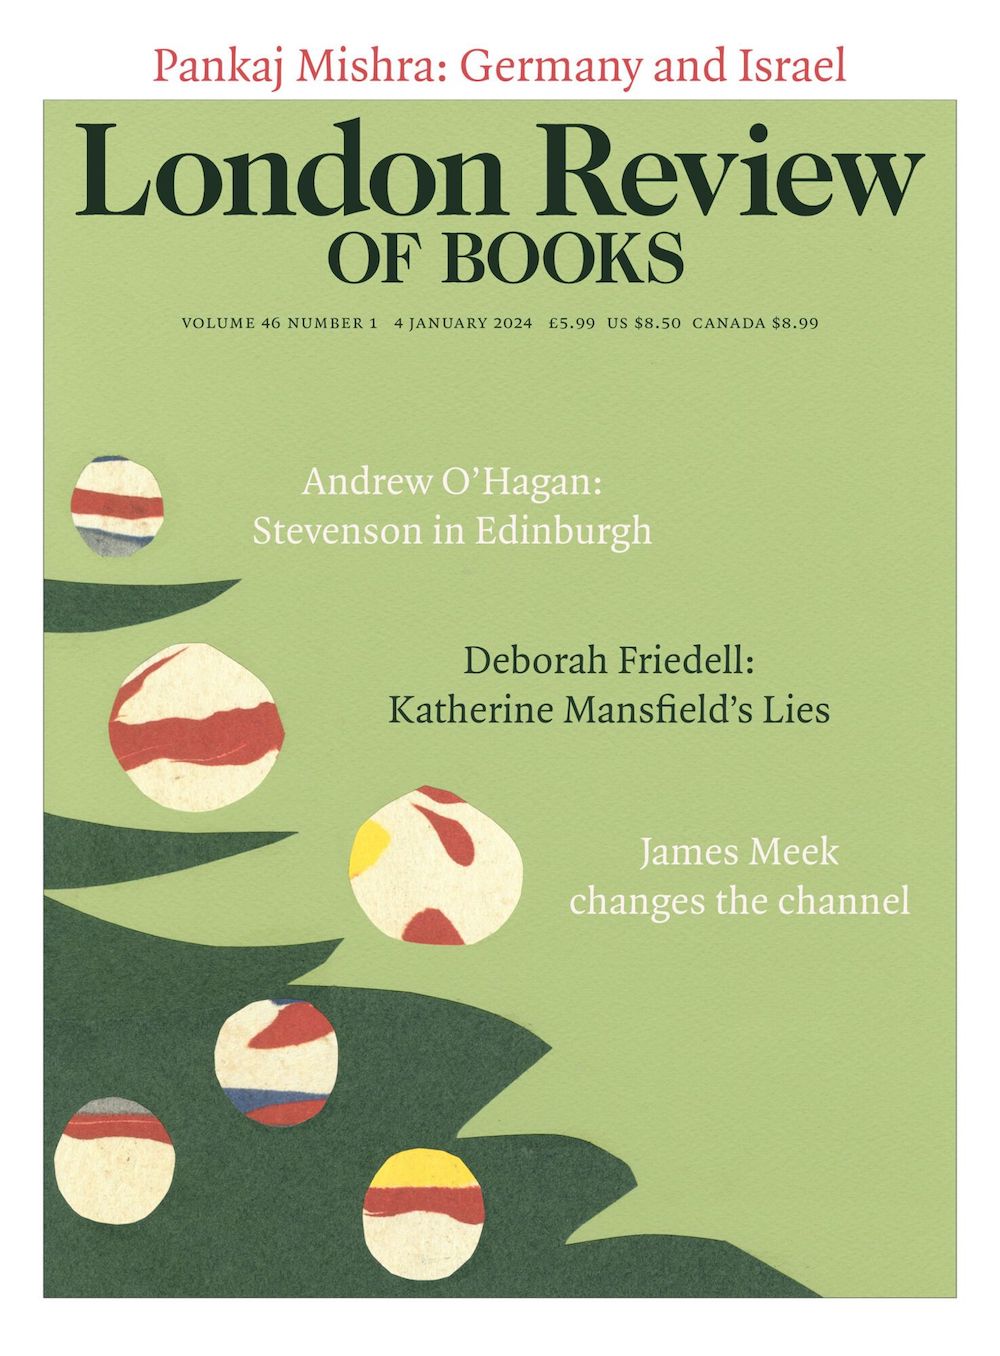 The London Review of Books, January 4, 2024